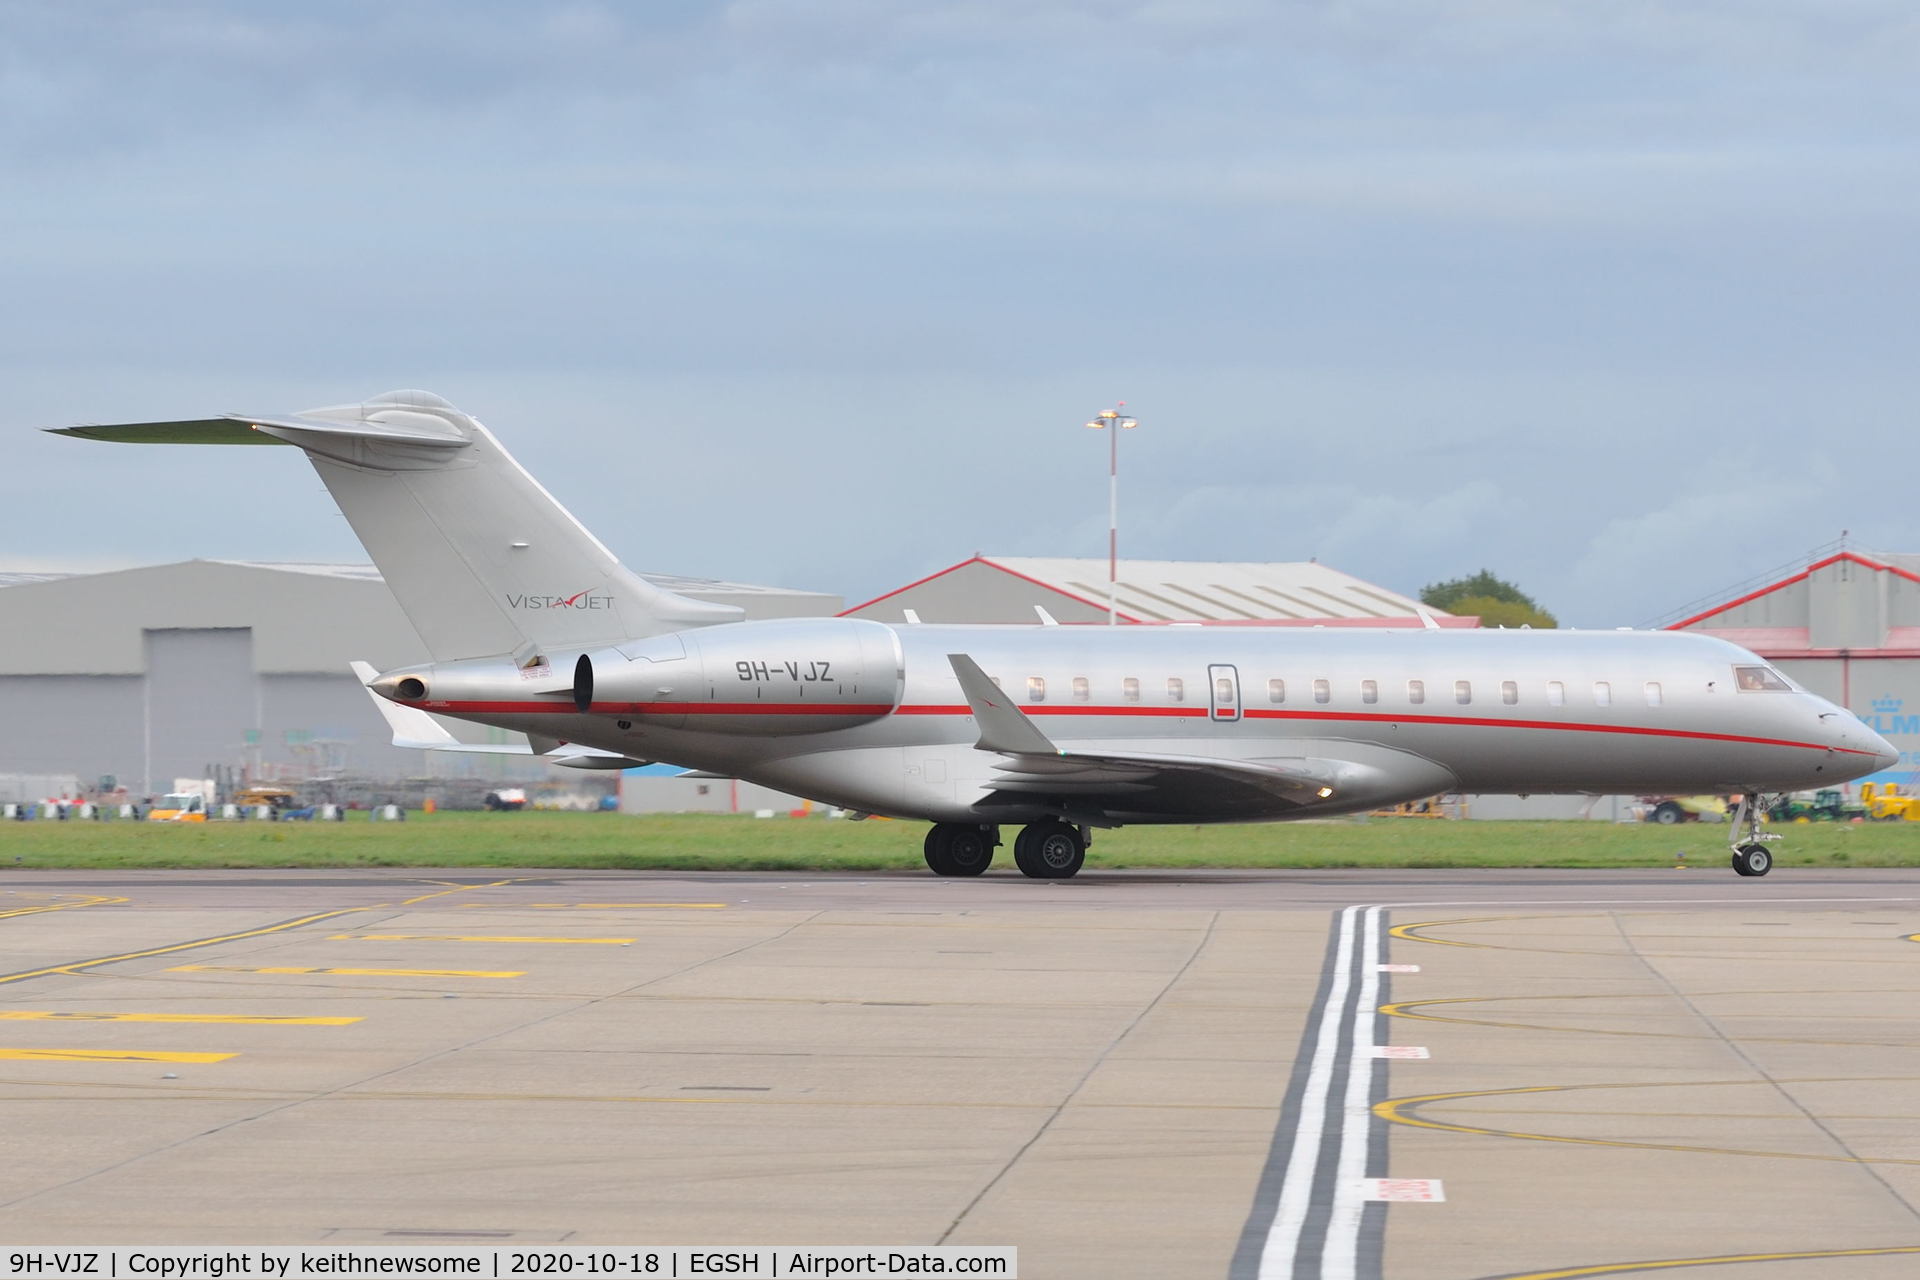 9H-VJZ, 2015 Bombardier BD-700-1A10 Global 6000 C/N 9746, Arriving at Norwich from Nice, France.